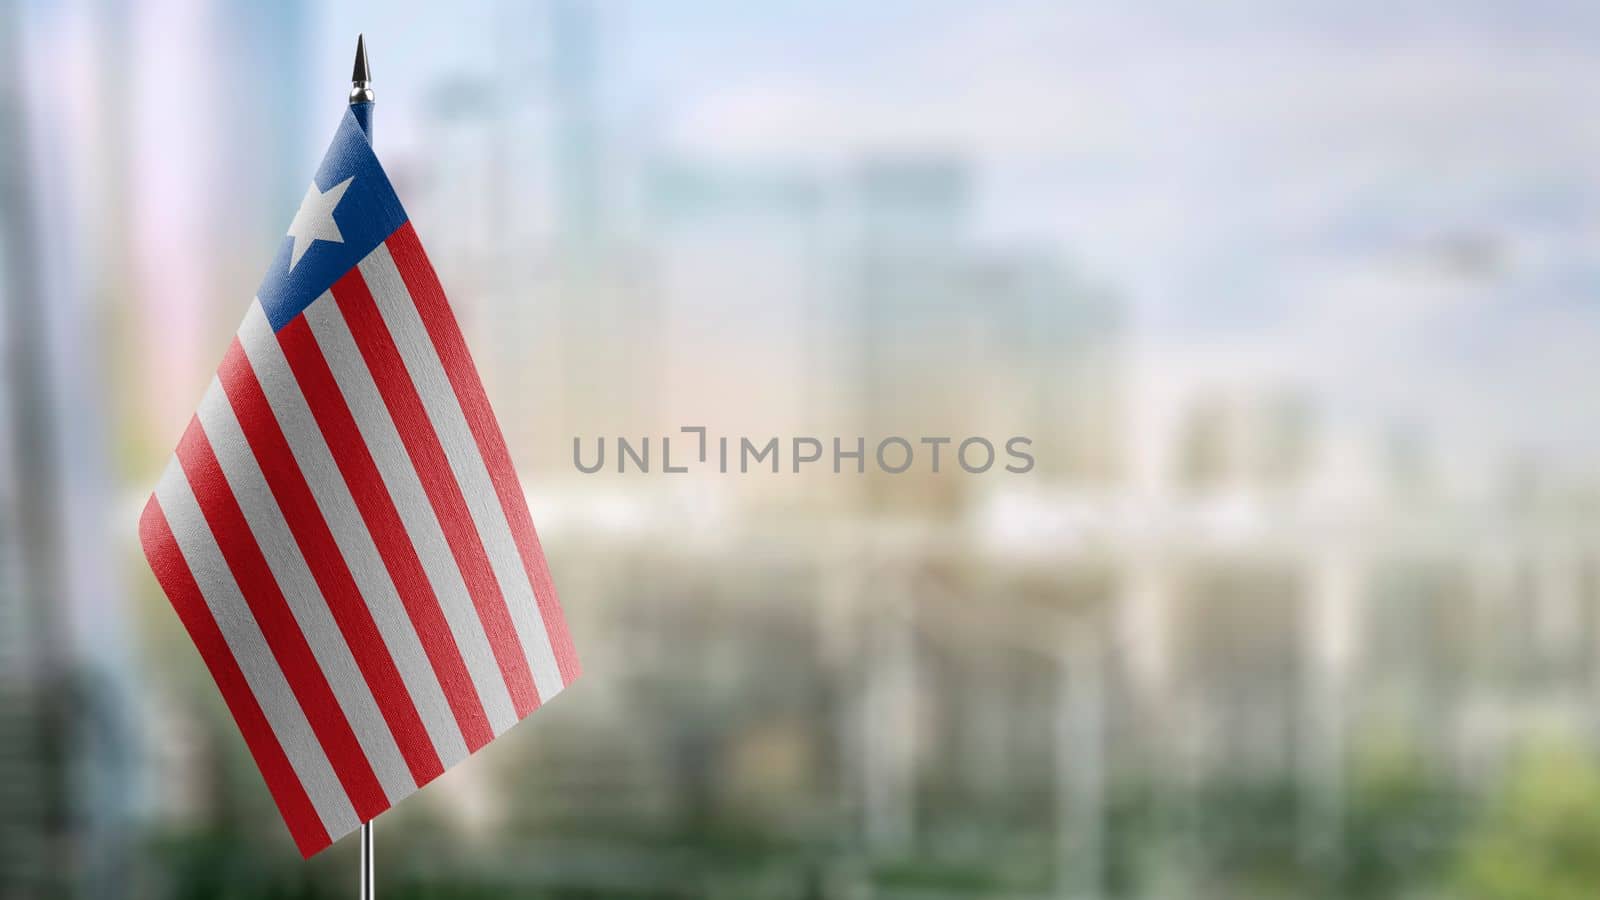 Small flags of the Liberia on an abstract blurry background.